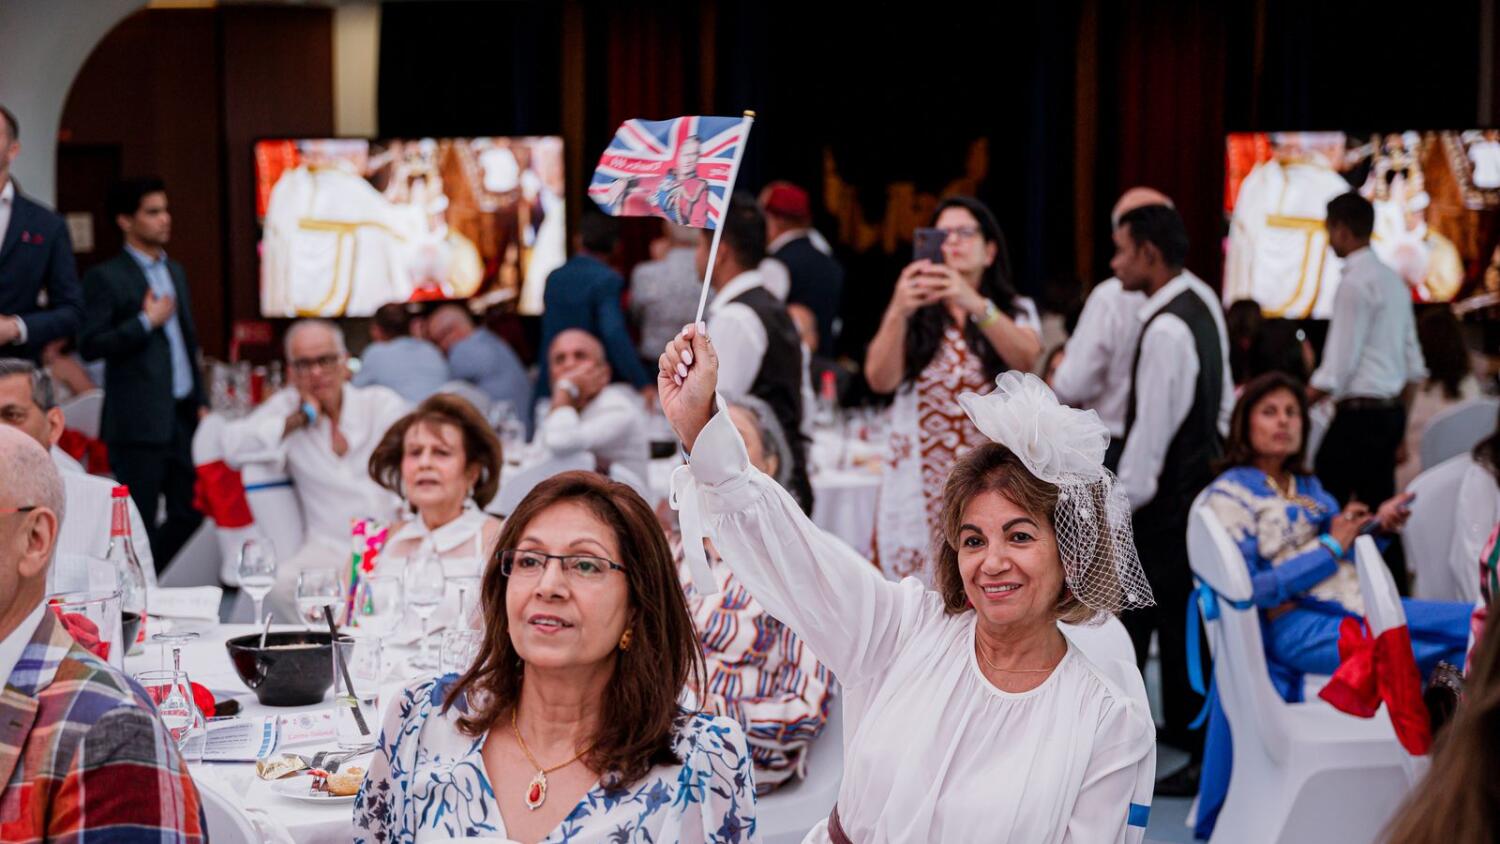 UK expats in Dubai watch the coronation of King Charles III at the Queen Elizabeth 2 ship on Saturday. Photo by Neeraj Murali.